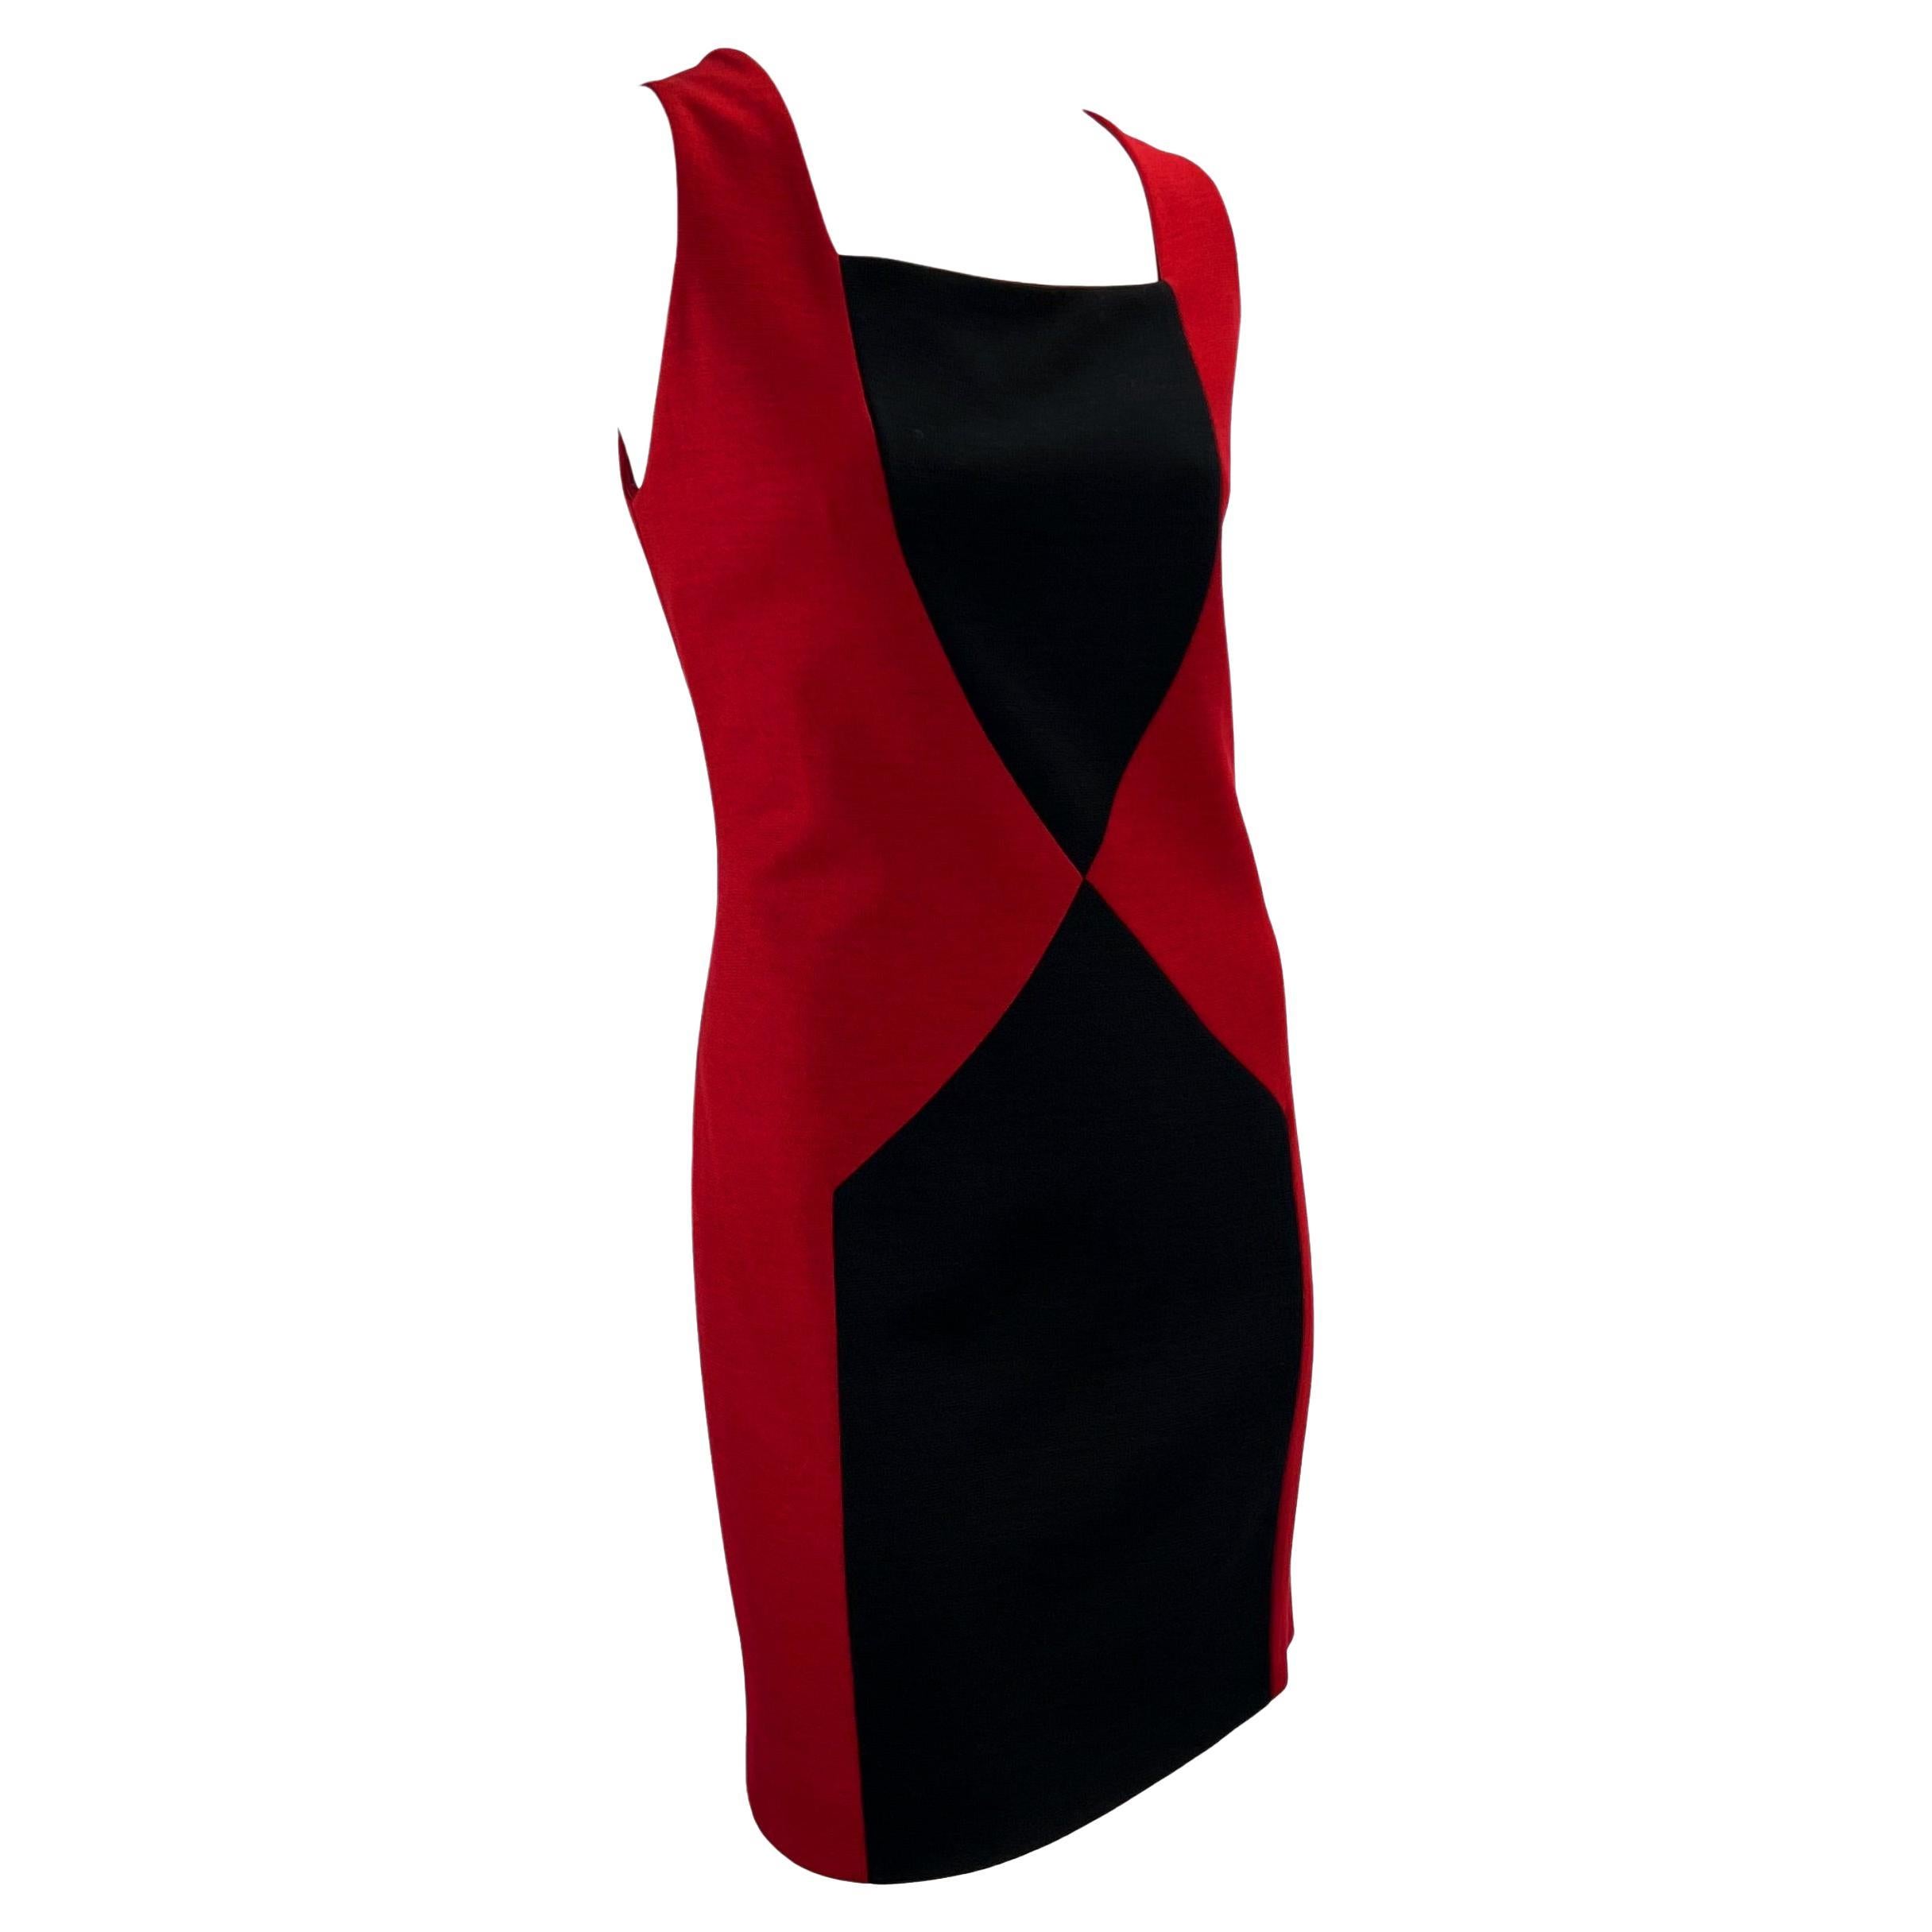 F/W 1997 Gianni Versace Couture Runway Red Colorblock Sleeveless Dress For Sale 3